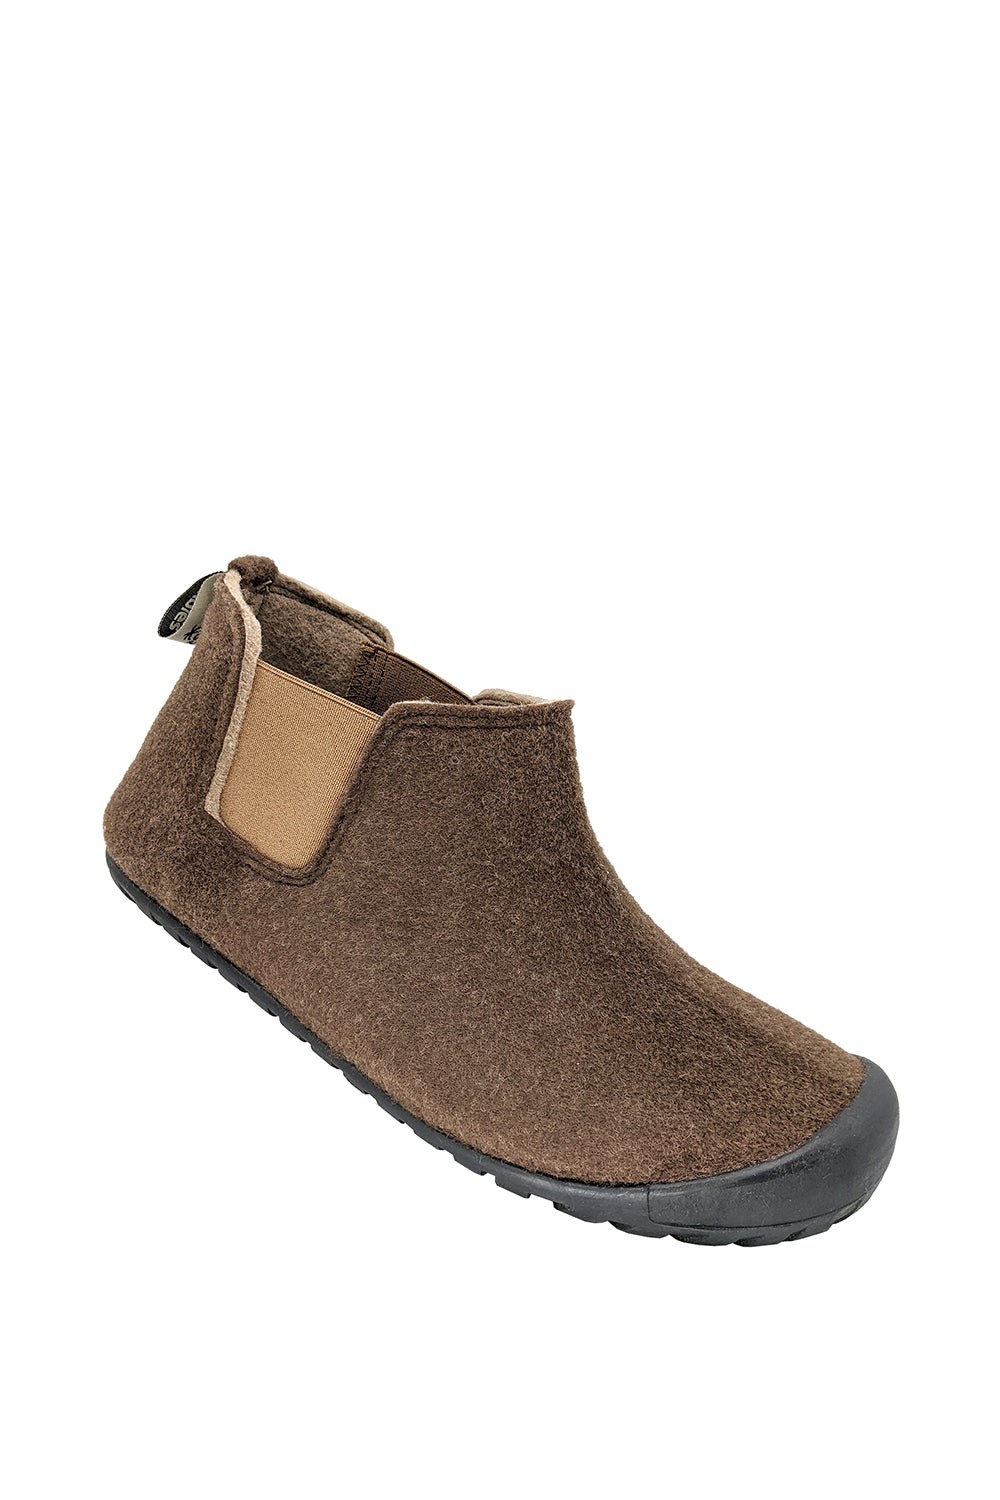 Brumby Womens Slipper Boots -